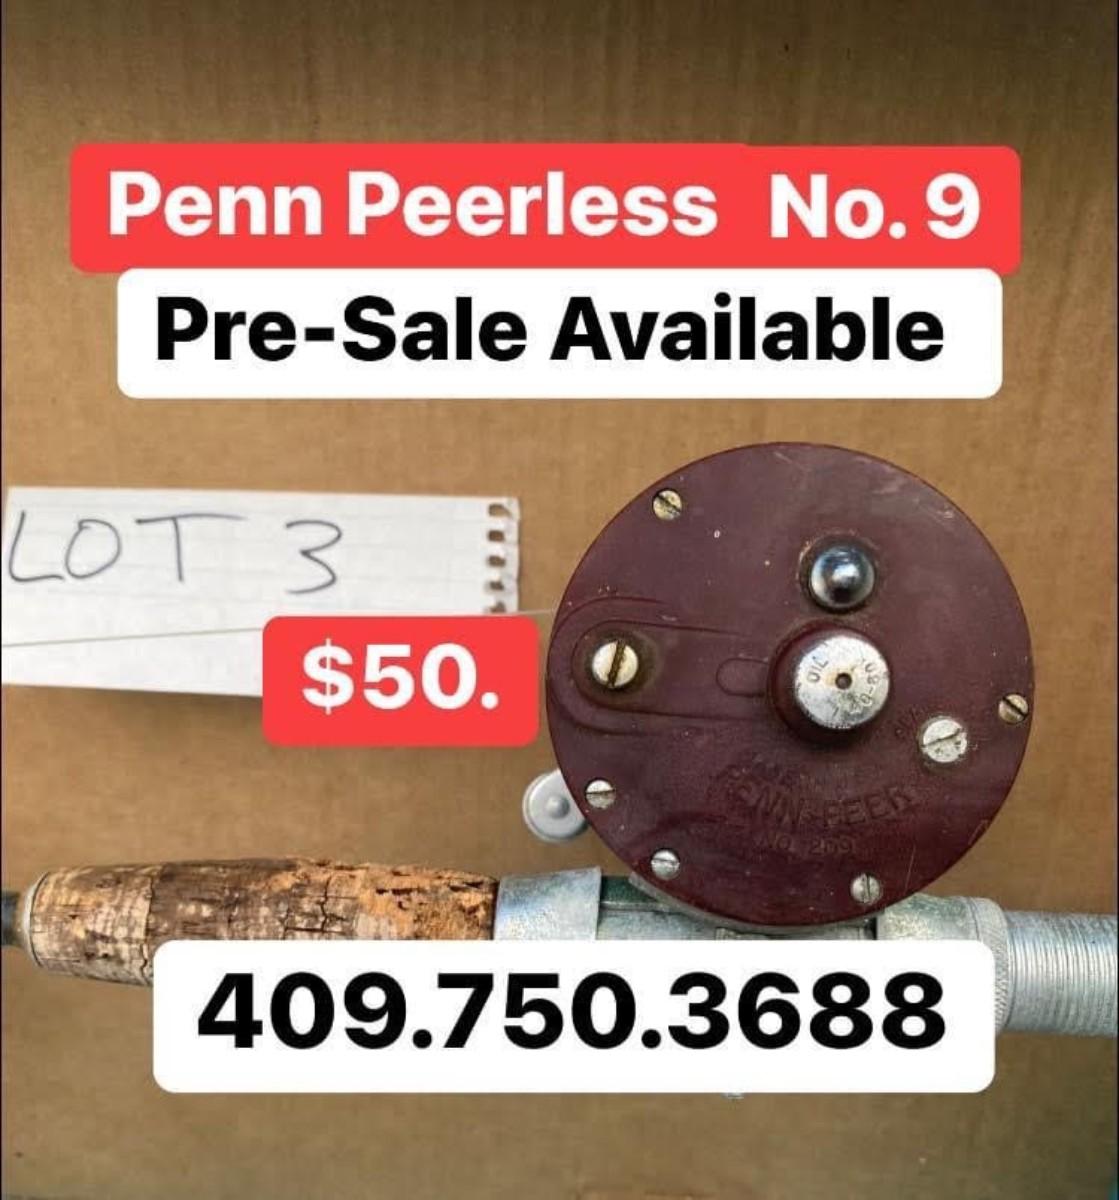 Penn Peerless No. 9 Made in USA Lot #3 used Fishing Gear - Liquidating  Collection of Texas Sportsman - Pre Sale Available 409.750.3688 Roland  Dressler